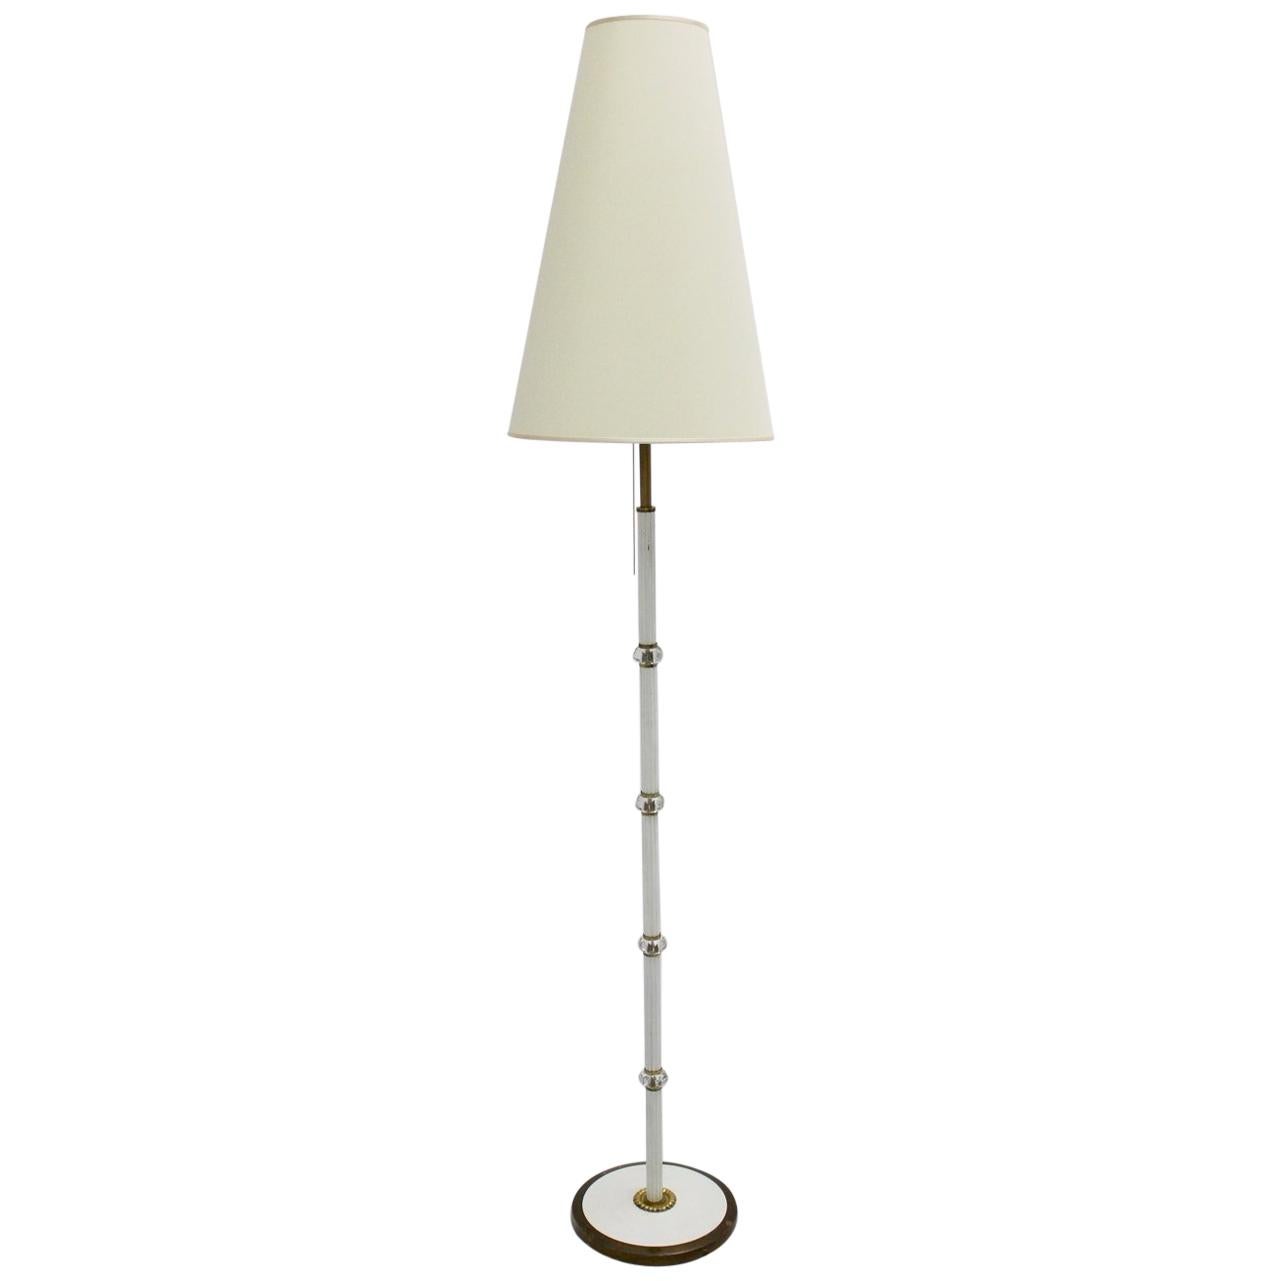 Mid-Century Modern Brass and White Vintage Floor Lamp, 1940s, Italy For Sale